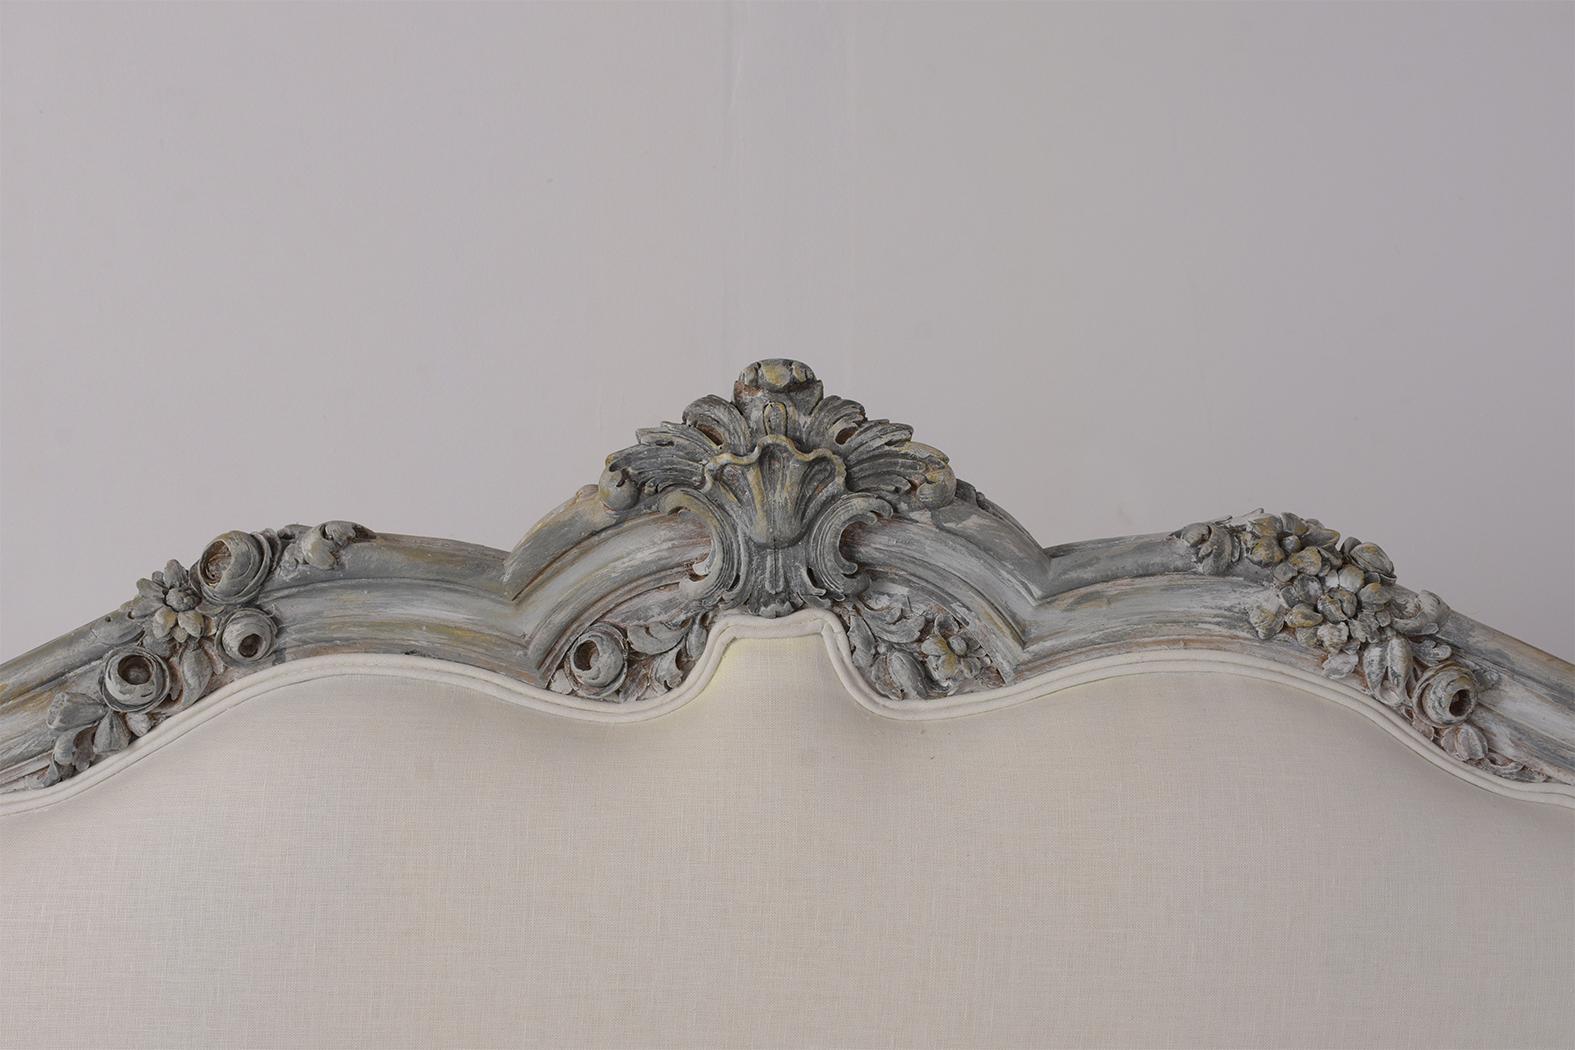 This Italian Louis XV style queen size bed frame features a wood frame painted in a pale grey and off the white color combination with a distressed finish. There are detailed carvings of flowers, leaves, garland, and seashells all along the